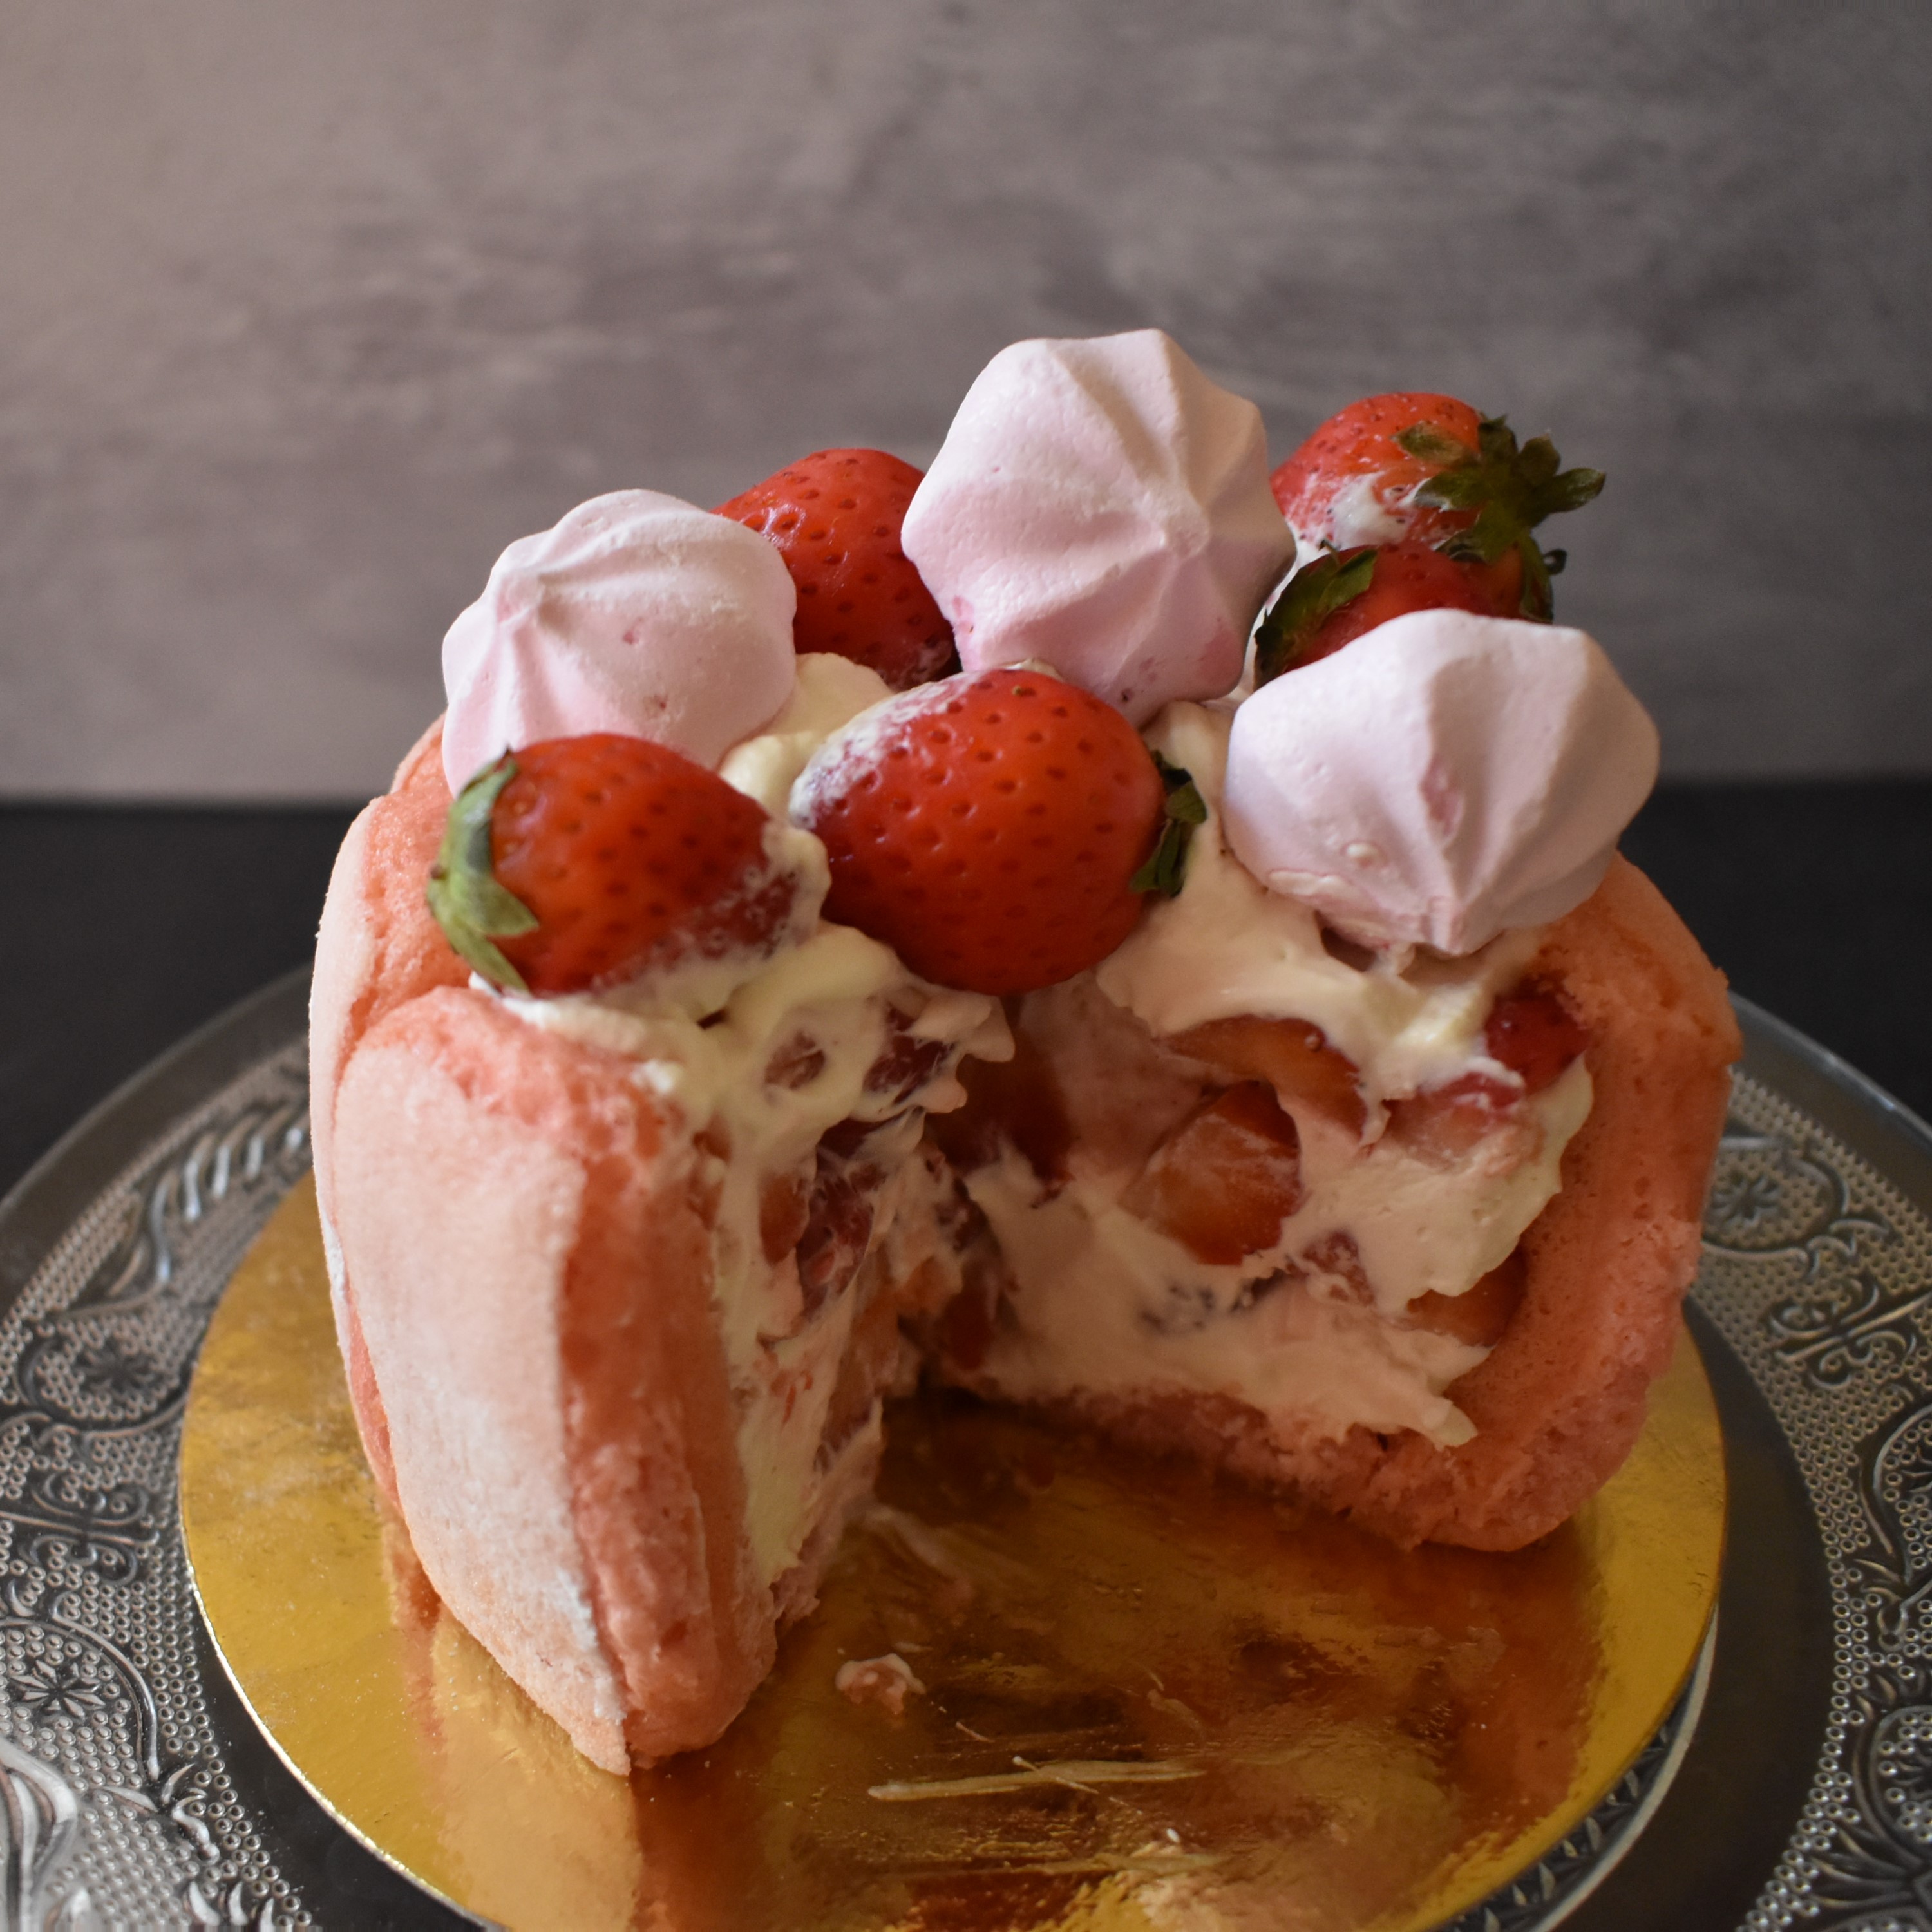 Strawberries and champagne charlotte with mascarpone and meringues